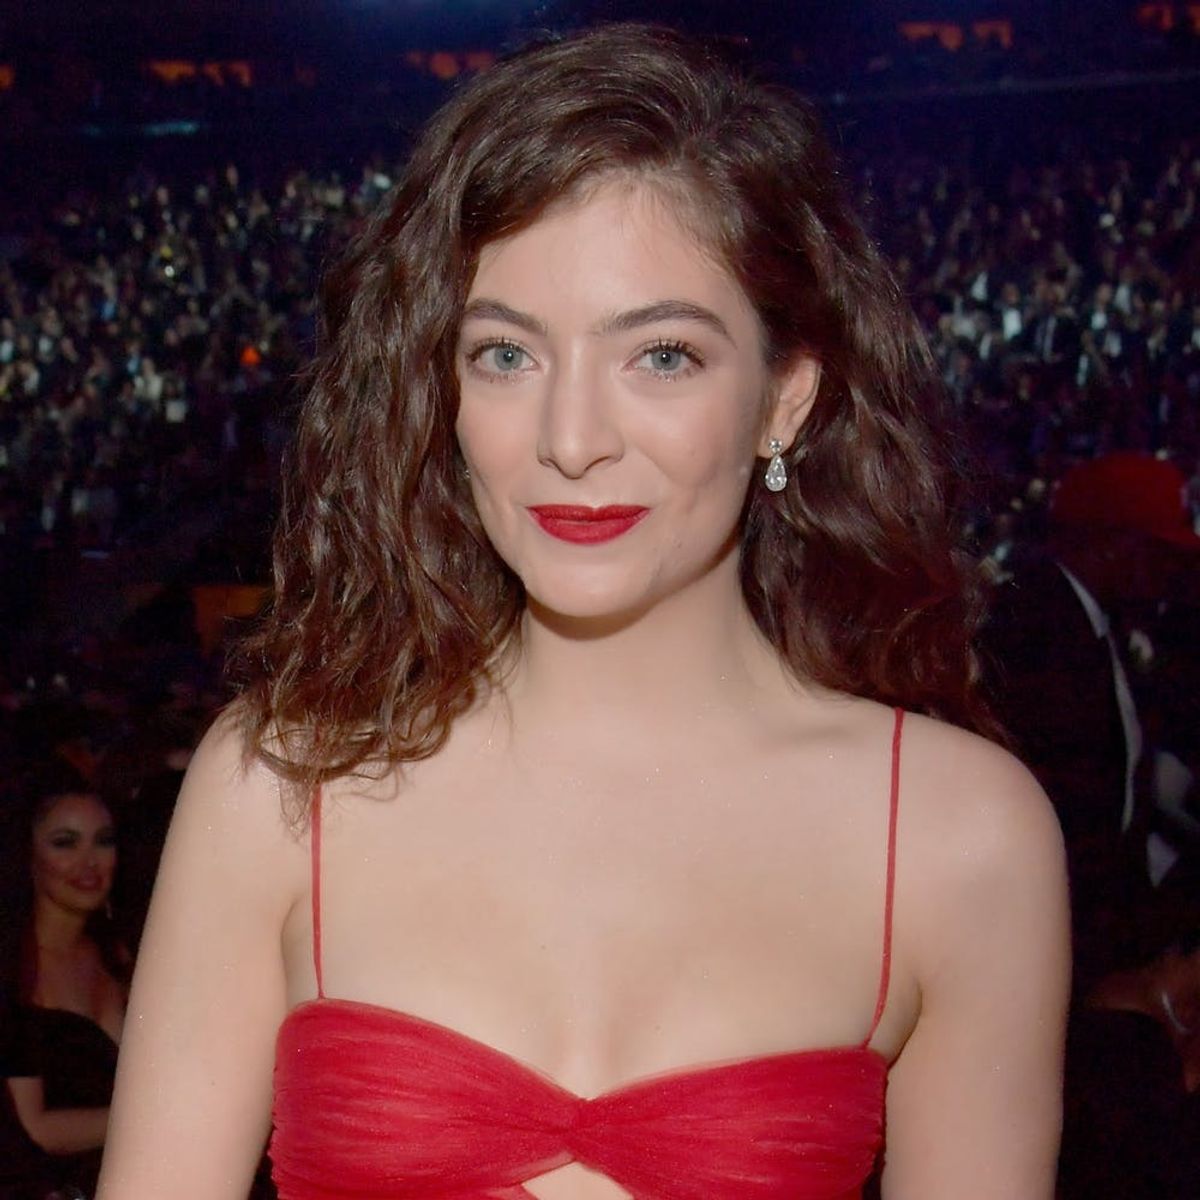 Here’s What the Grammys Had to Say About Lorde Not Performing